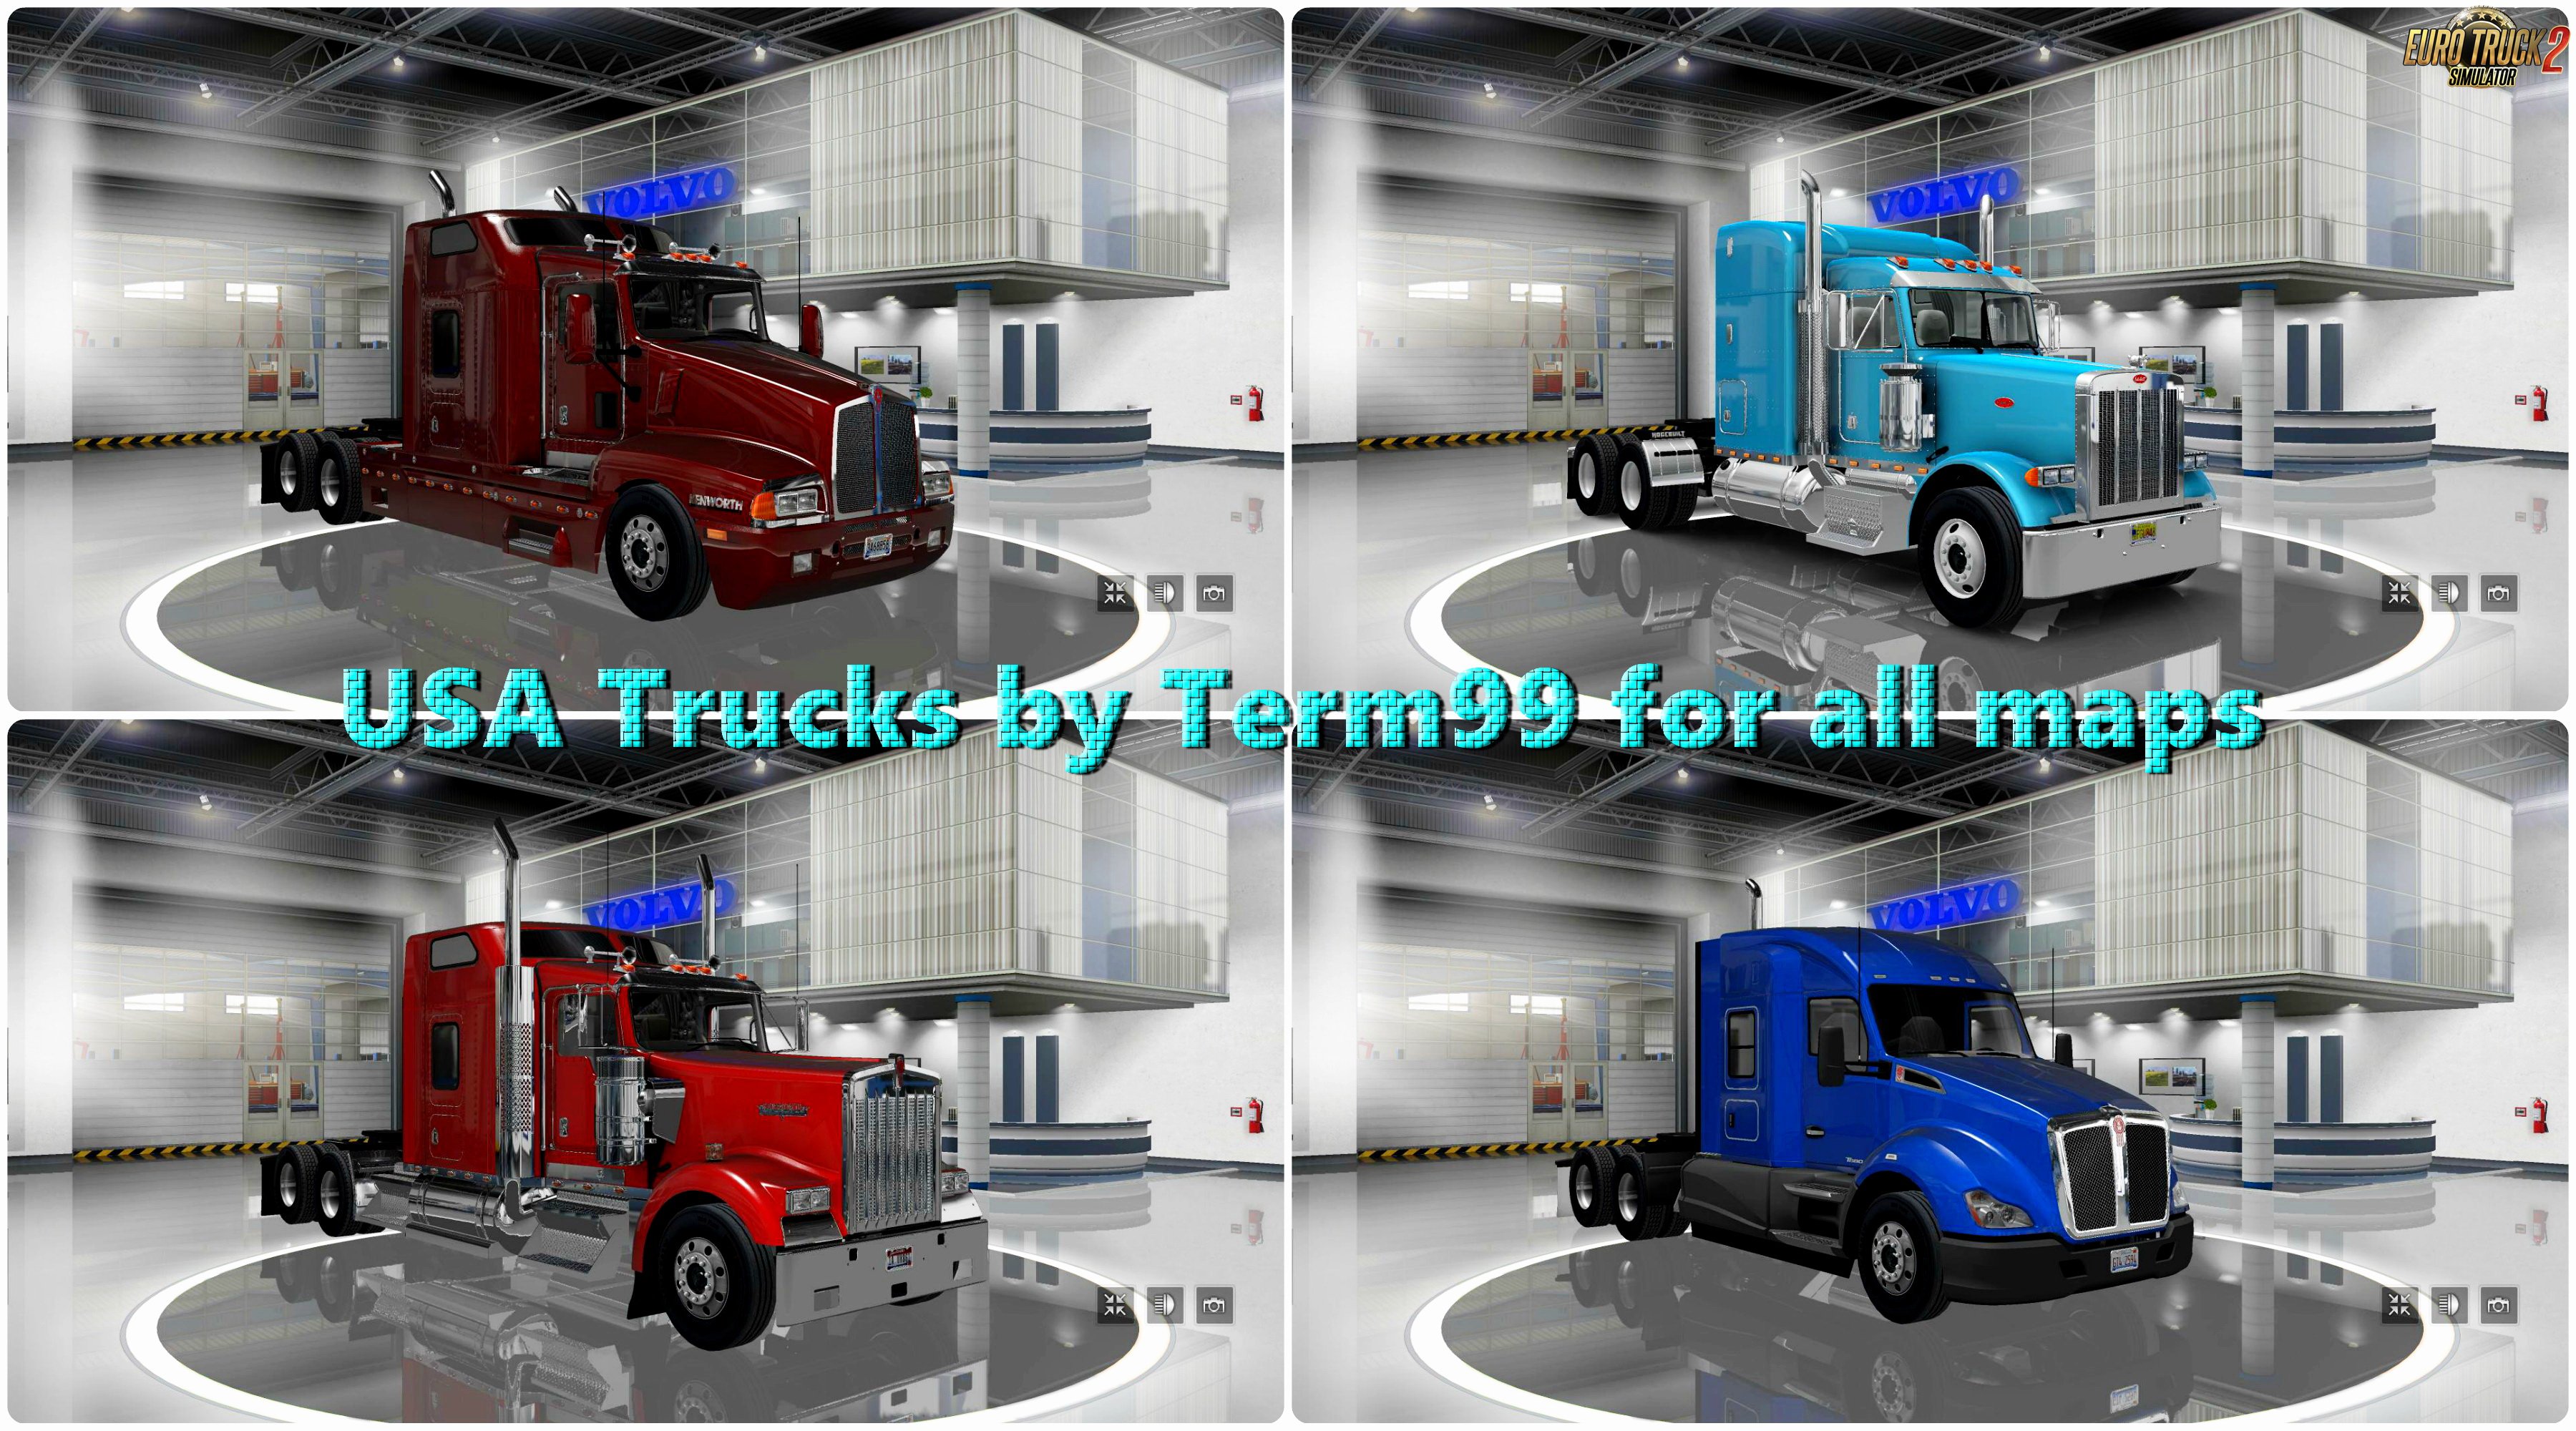 USA Trucks by Term99 for all maps v4.0.1 (1.28.x)